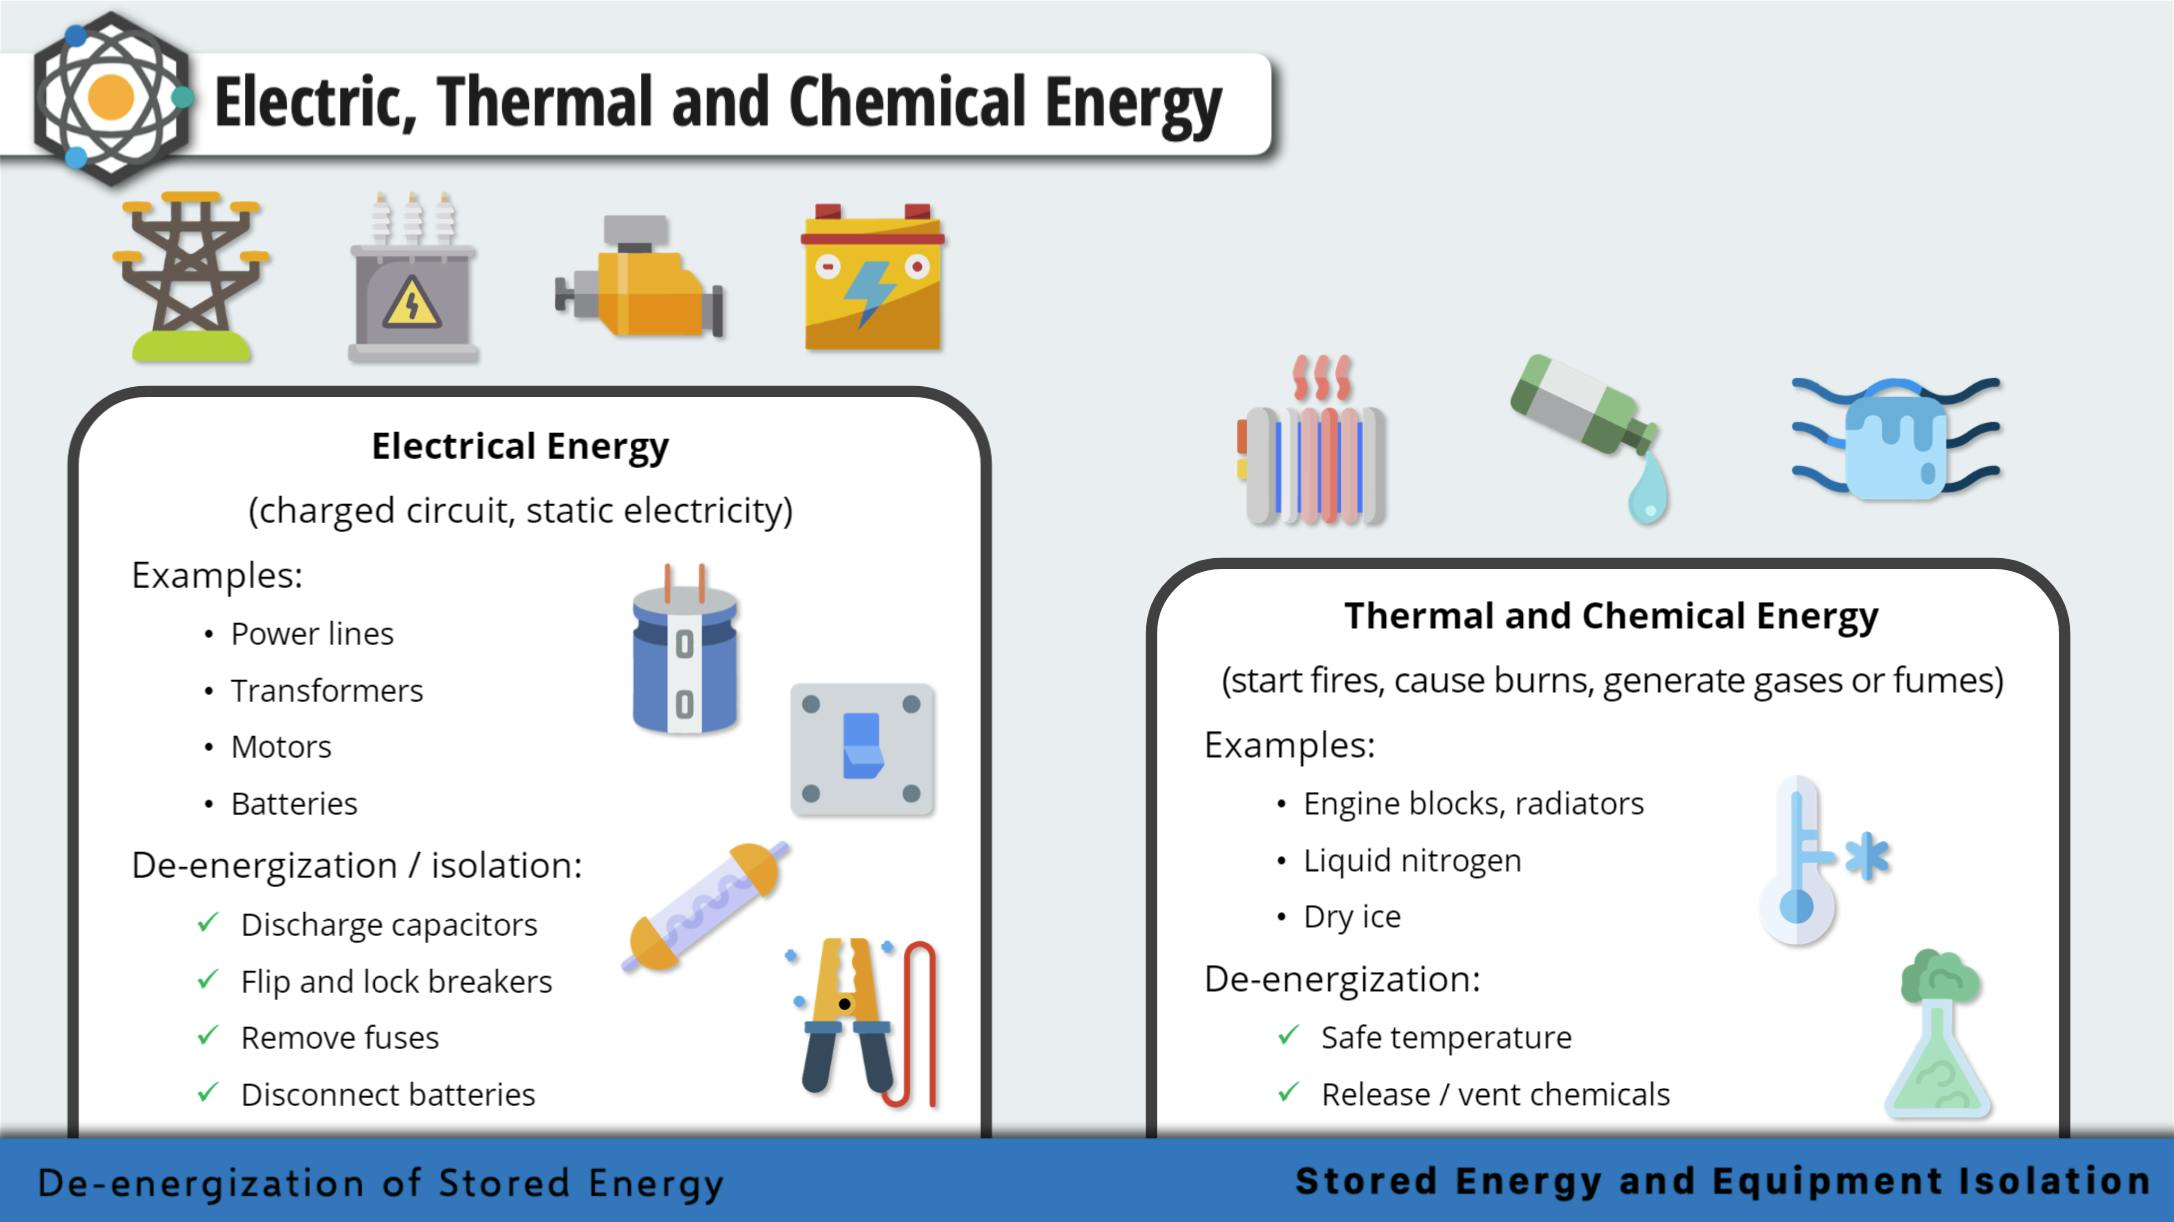 Deenergization of Stored Energy